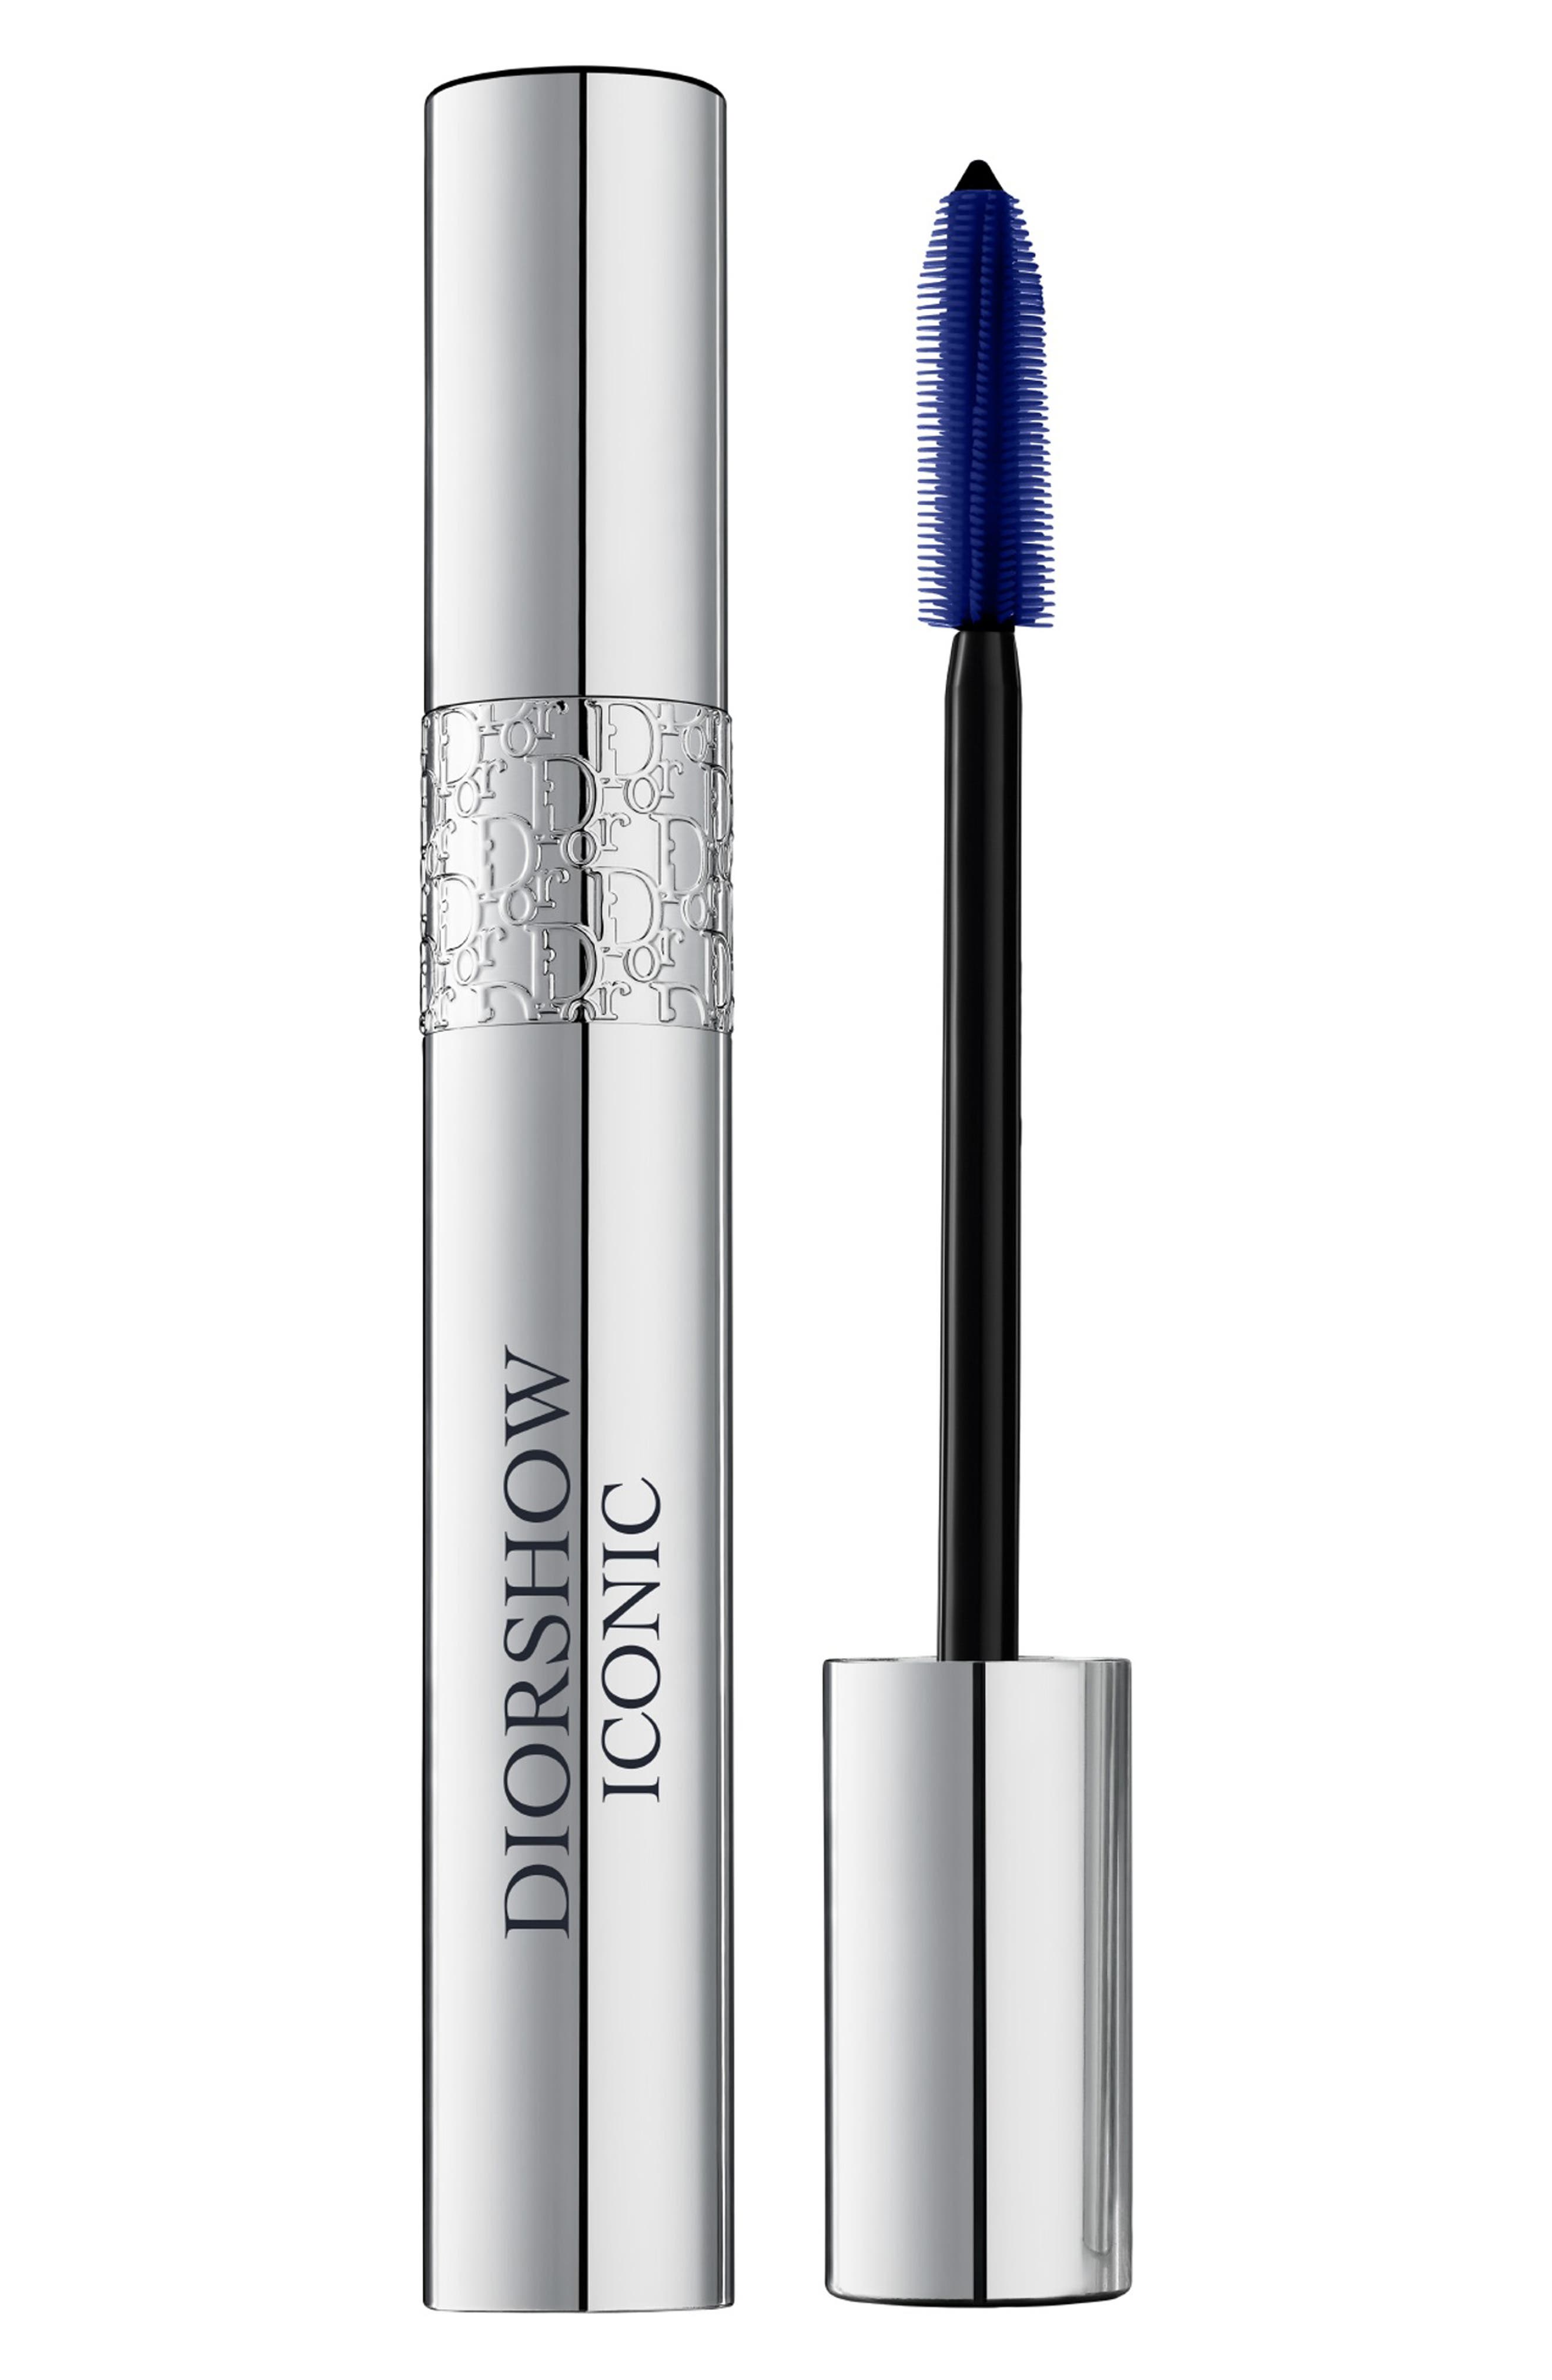 EAN 3348900877740 product image for Dior Diorshow Iconic High Definition Lash Curler Mascara - Navy Blue 268 | upcitemdb.com